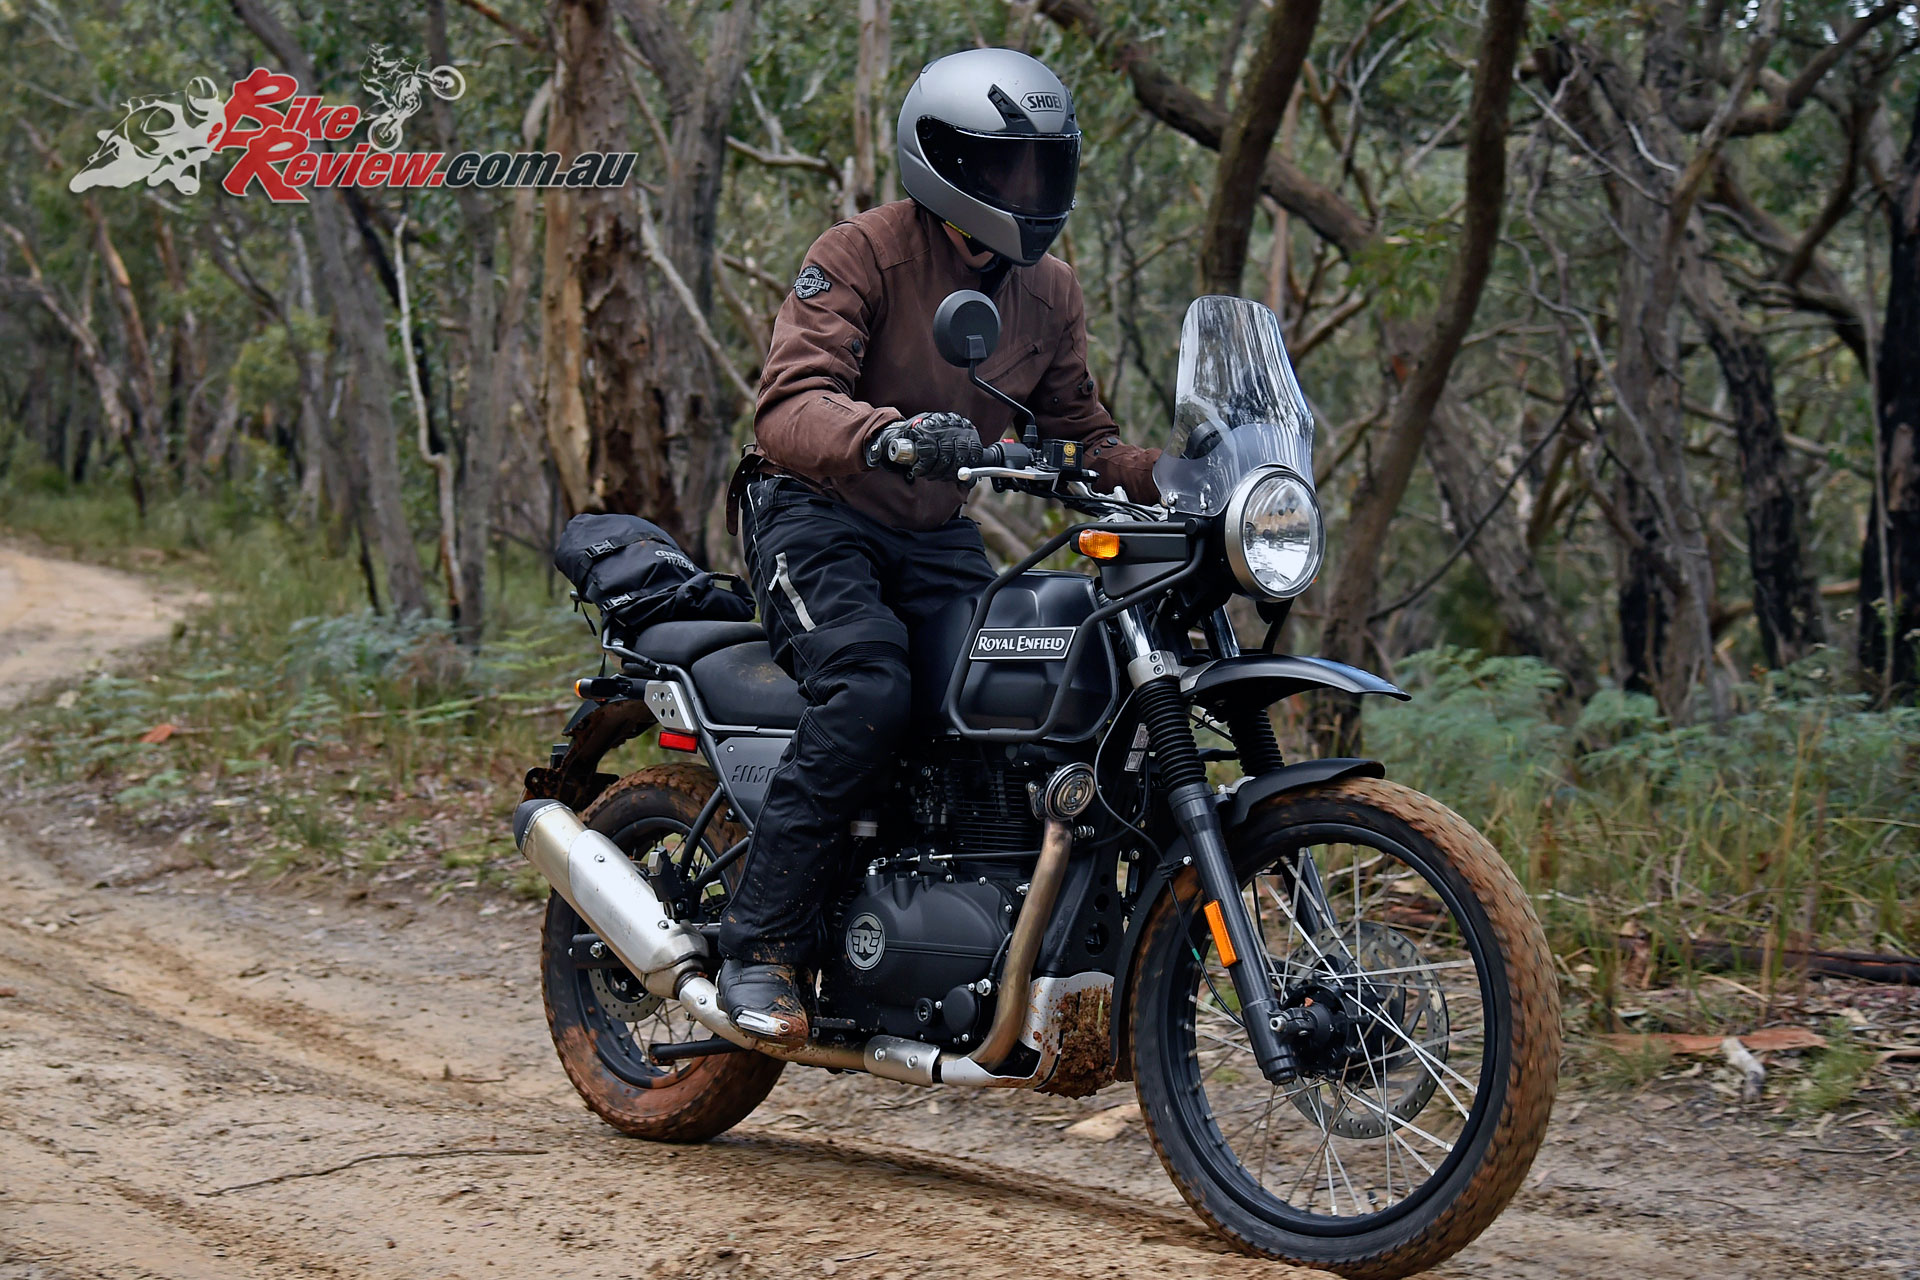 Shoei RYD helmet at the Royal Enfield Himalayan launch, getting a bit of off sealed-road action